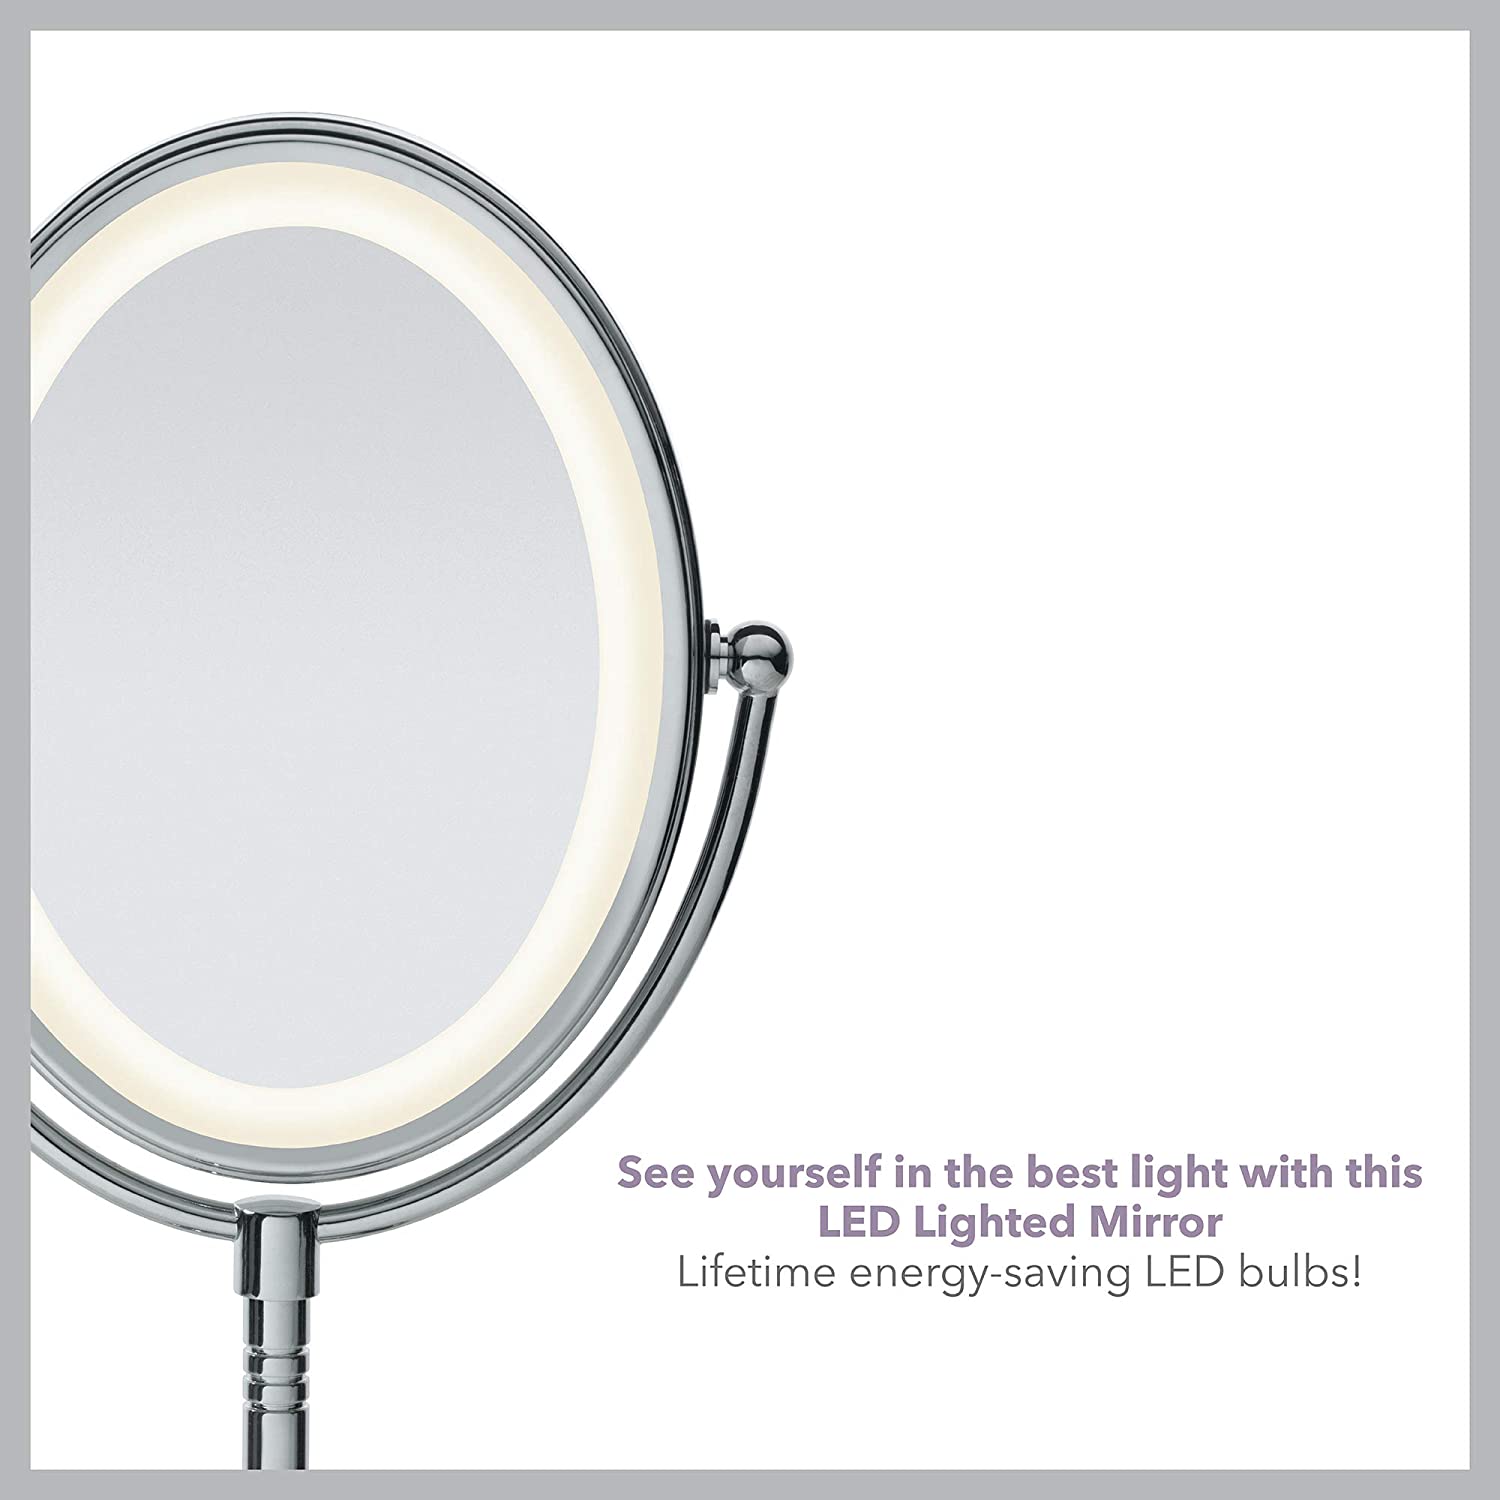 Conair Double-Sided Lighted Vanity Mirror with LED Lights, 1x/7x Magnification, Satin Nickel, BE157 - image 3 of 8